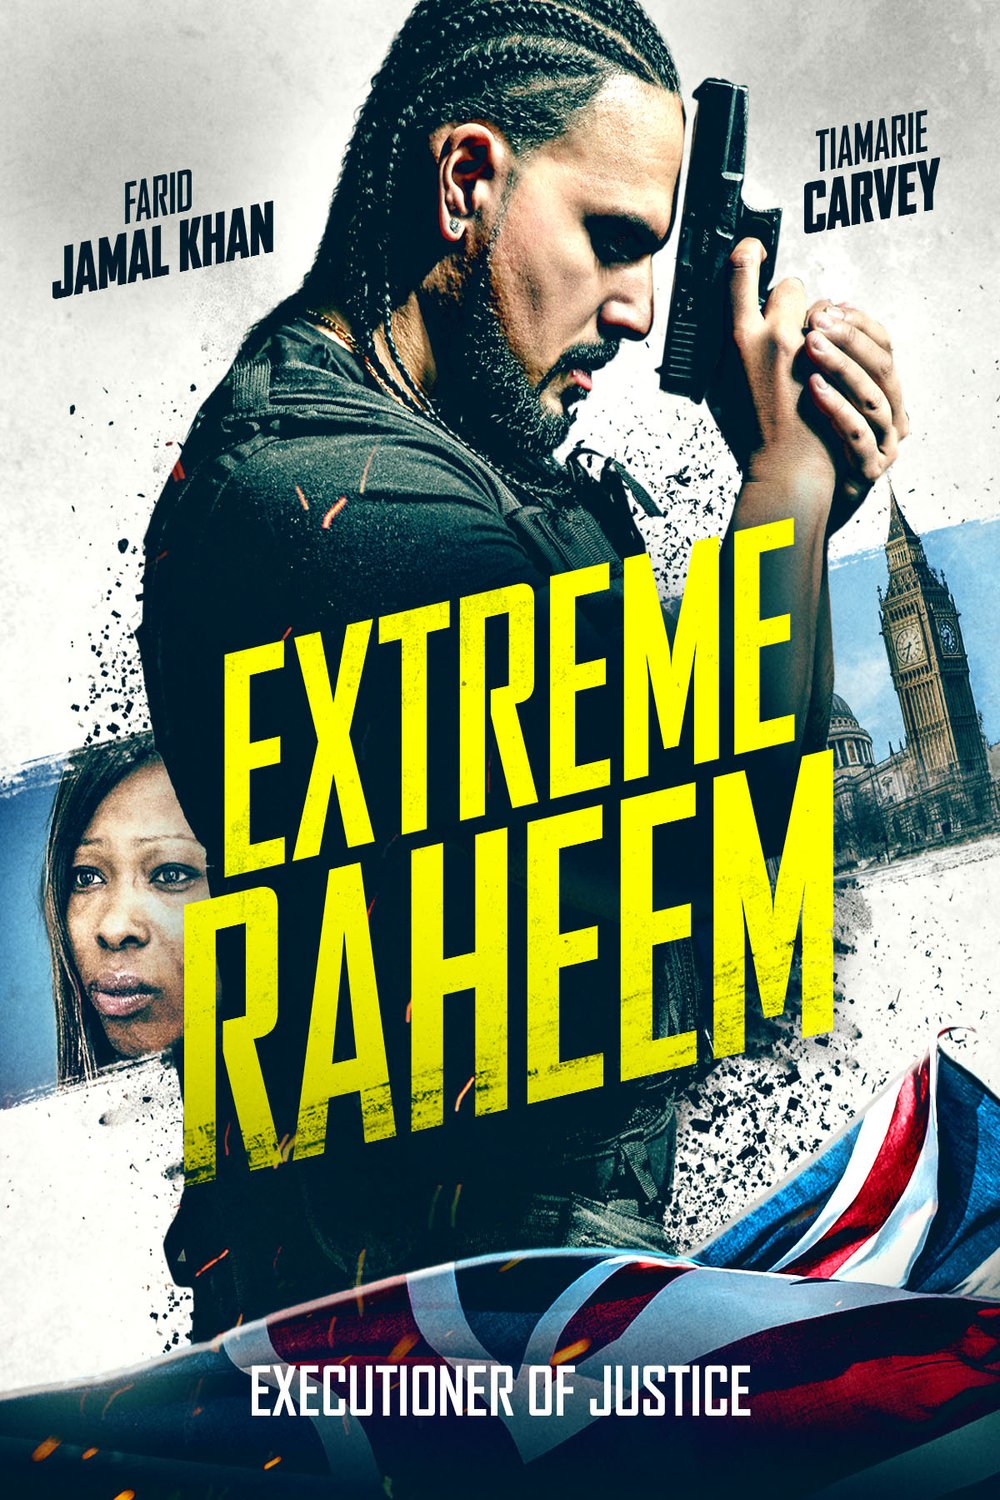 Poster of the movie Extreme Raheem